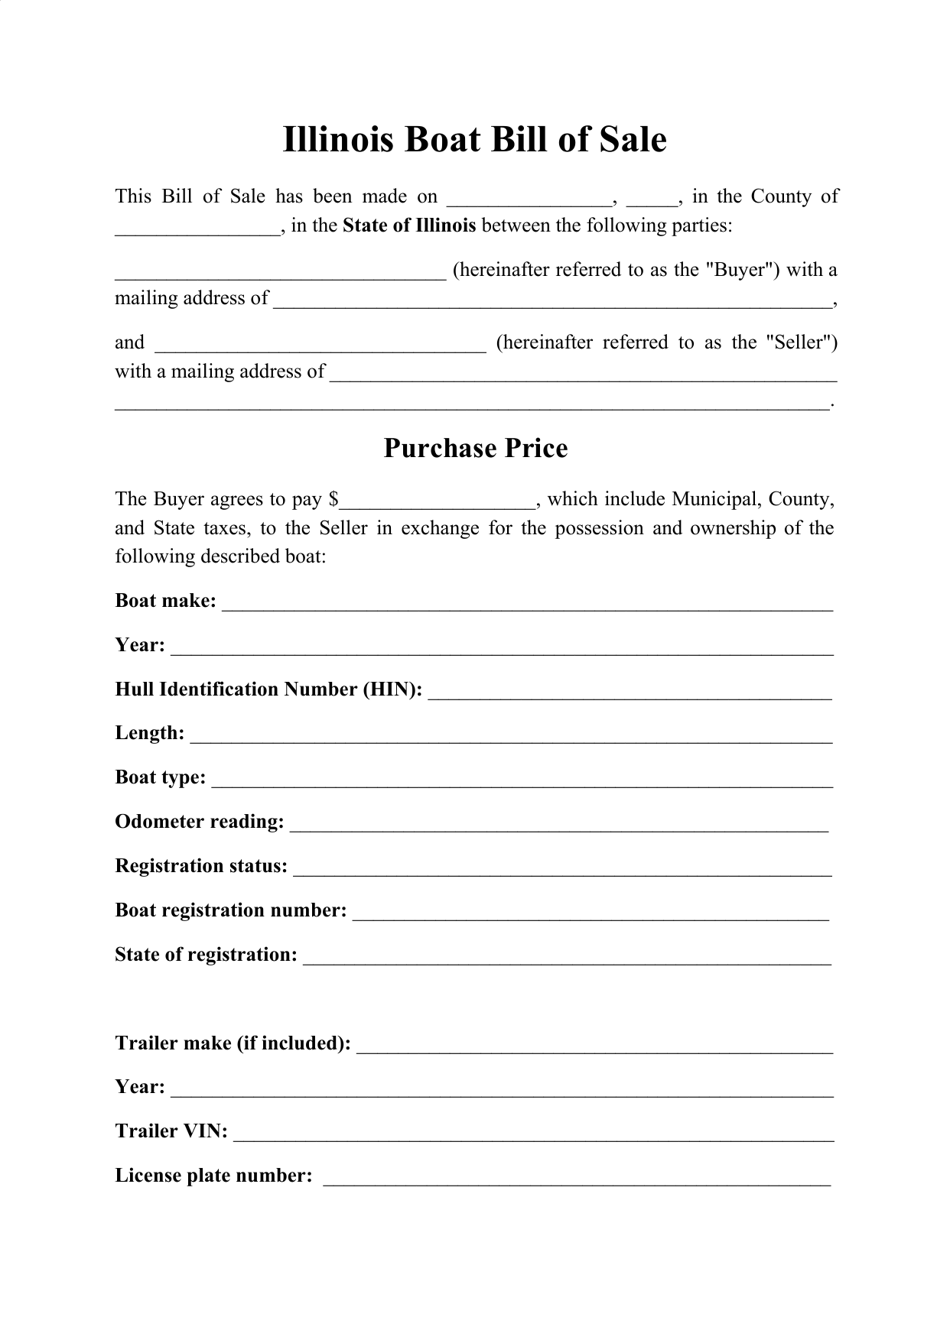 illinois-boat-bill-of-sale-form-download-printable-pdf-templateroller